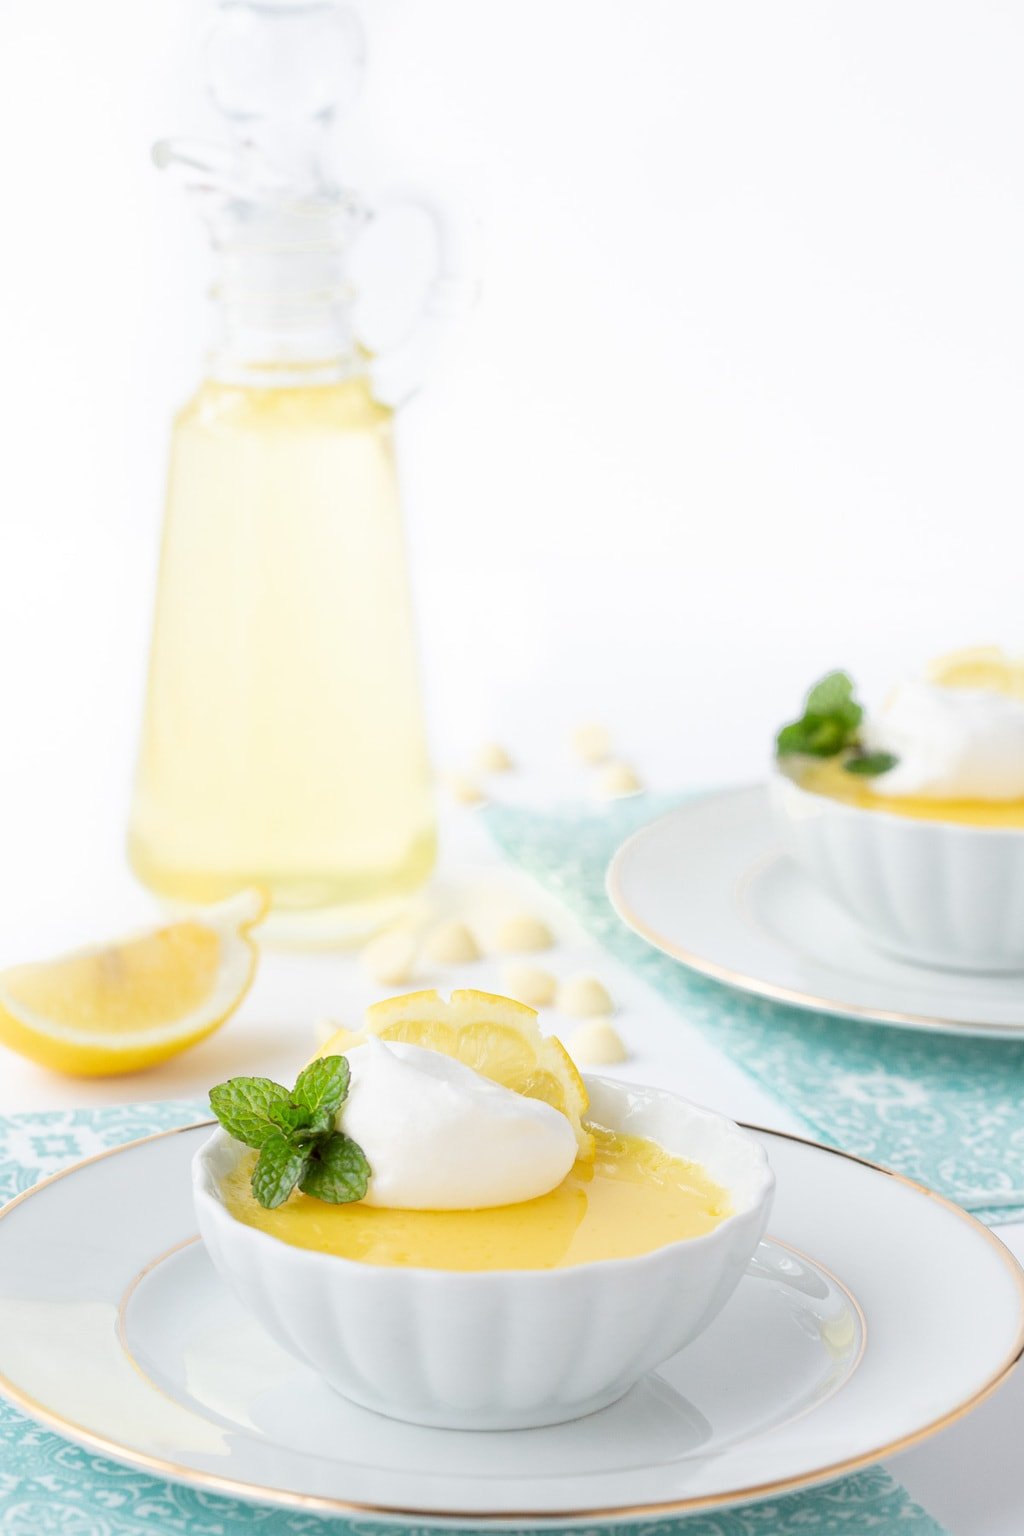 Vertical photo of Lemon and White Chocolate Pots de Crème in small white dishes with a glass pitcher of lemoncello syrup in the background.